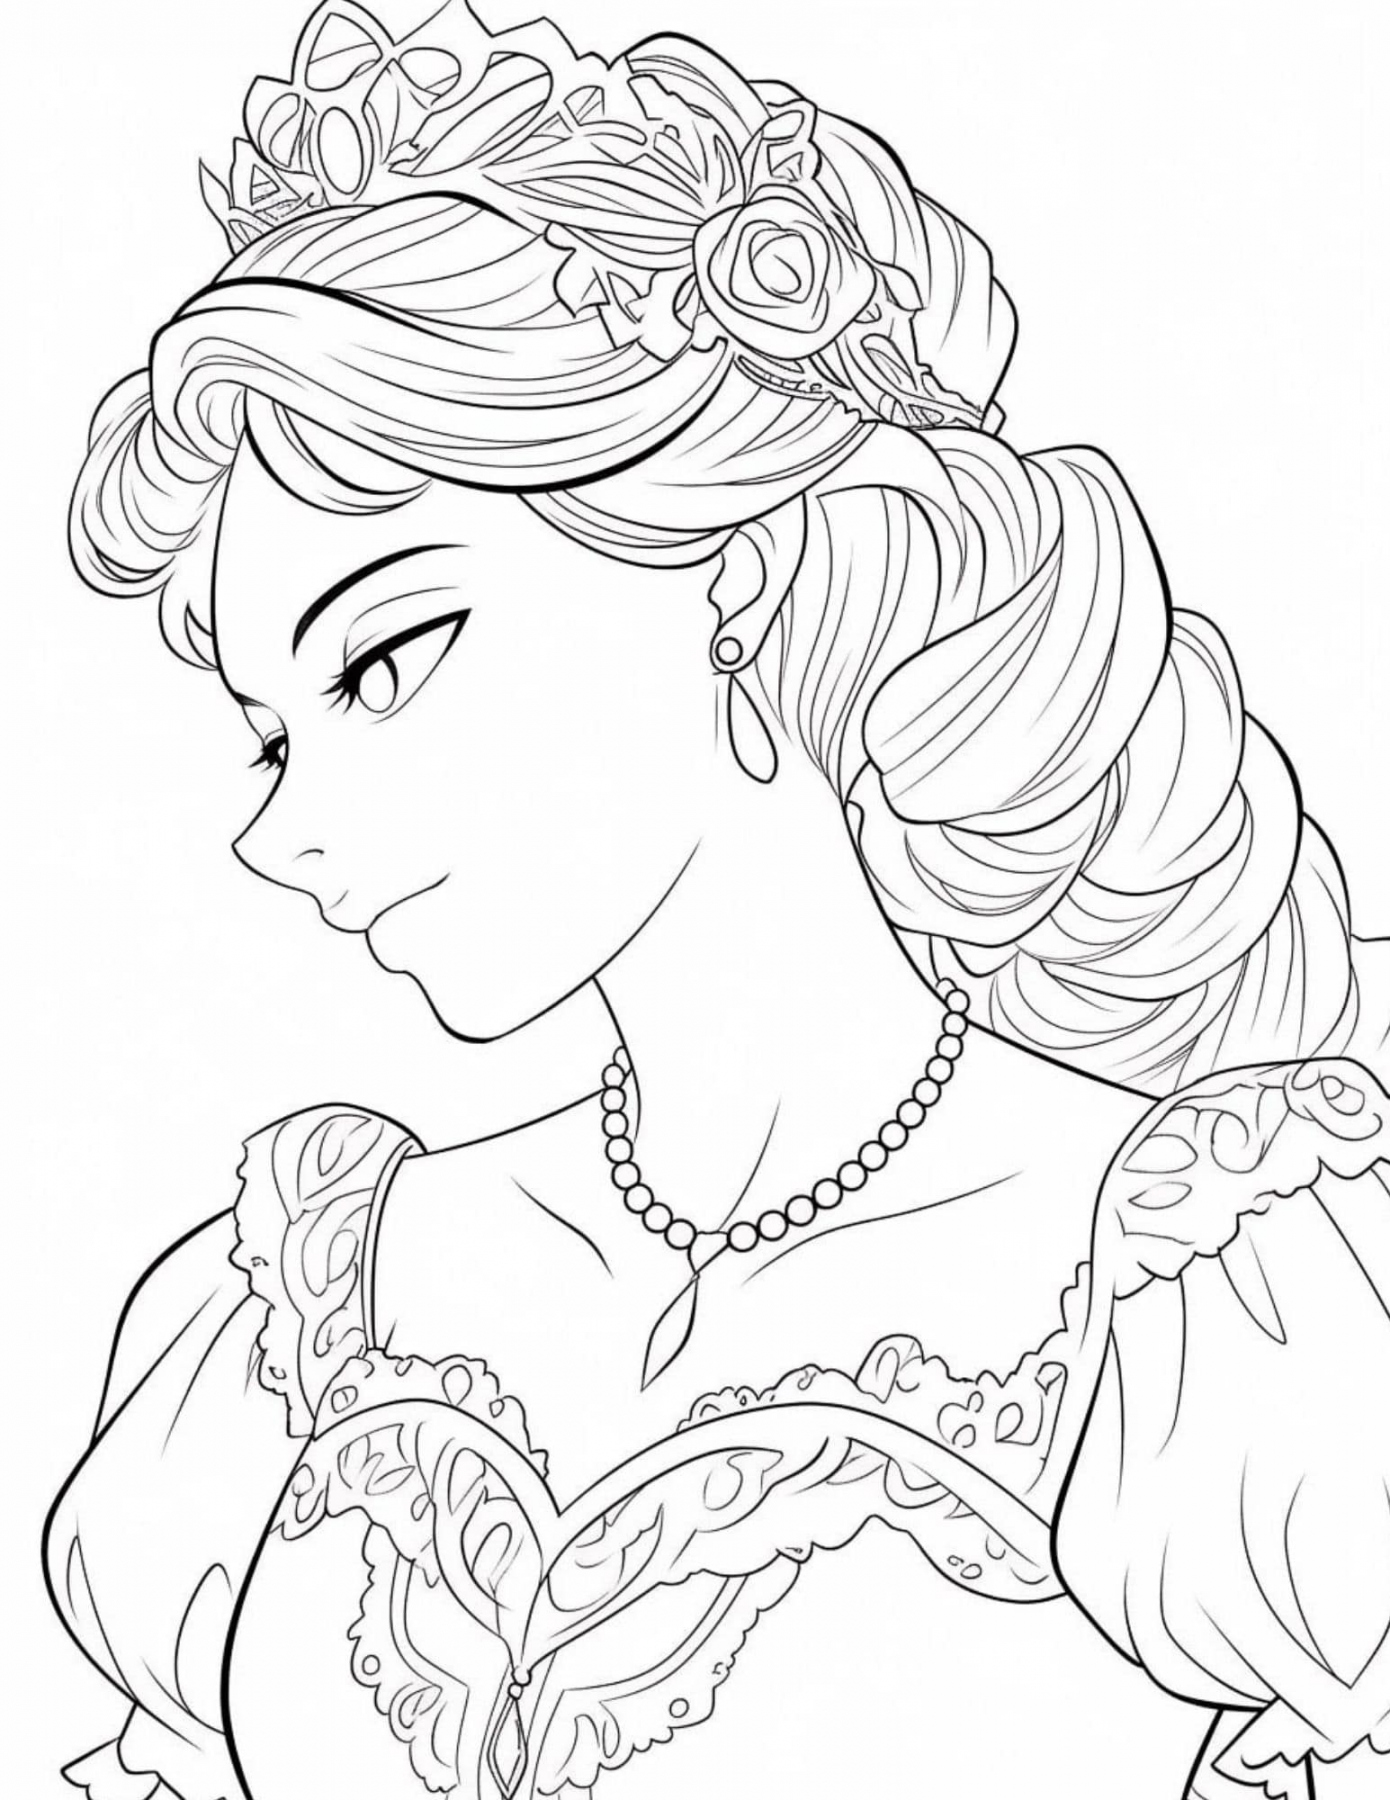 Gorgeous Princess Coloring Pages For Kids And Adults - FREE Printables - Free Printable Princess Coloring Pages